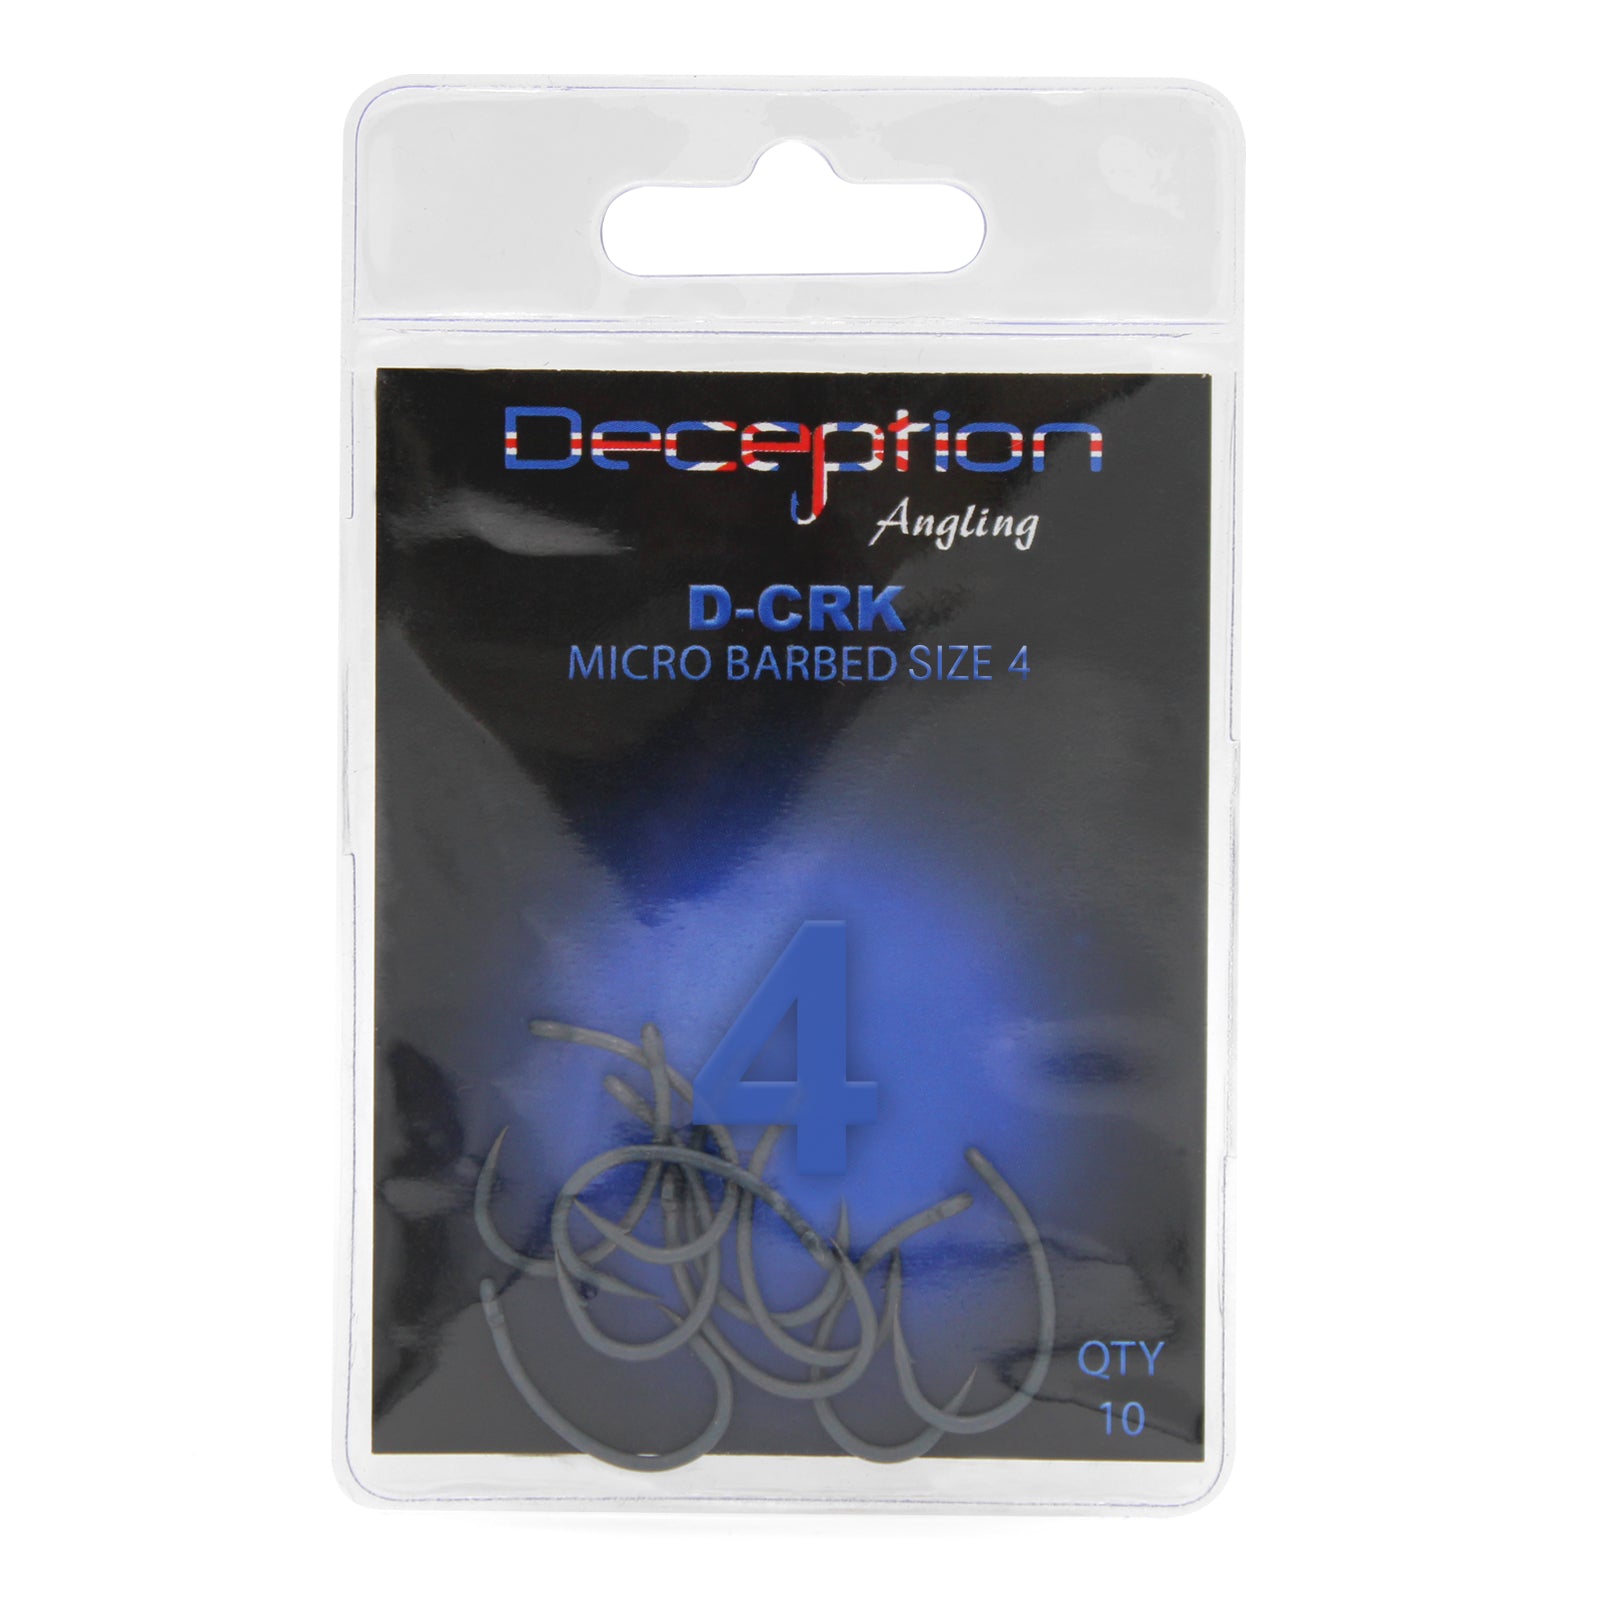 Deception Angling D-CRK Micro Barbed Fishing Hooks Pack of 10 Size 4